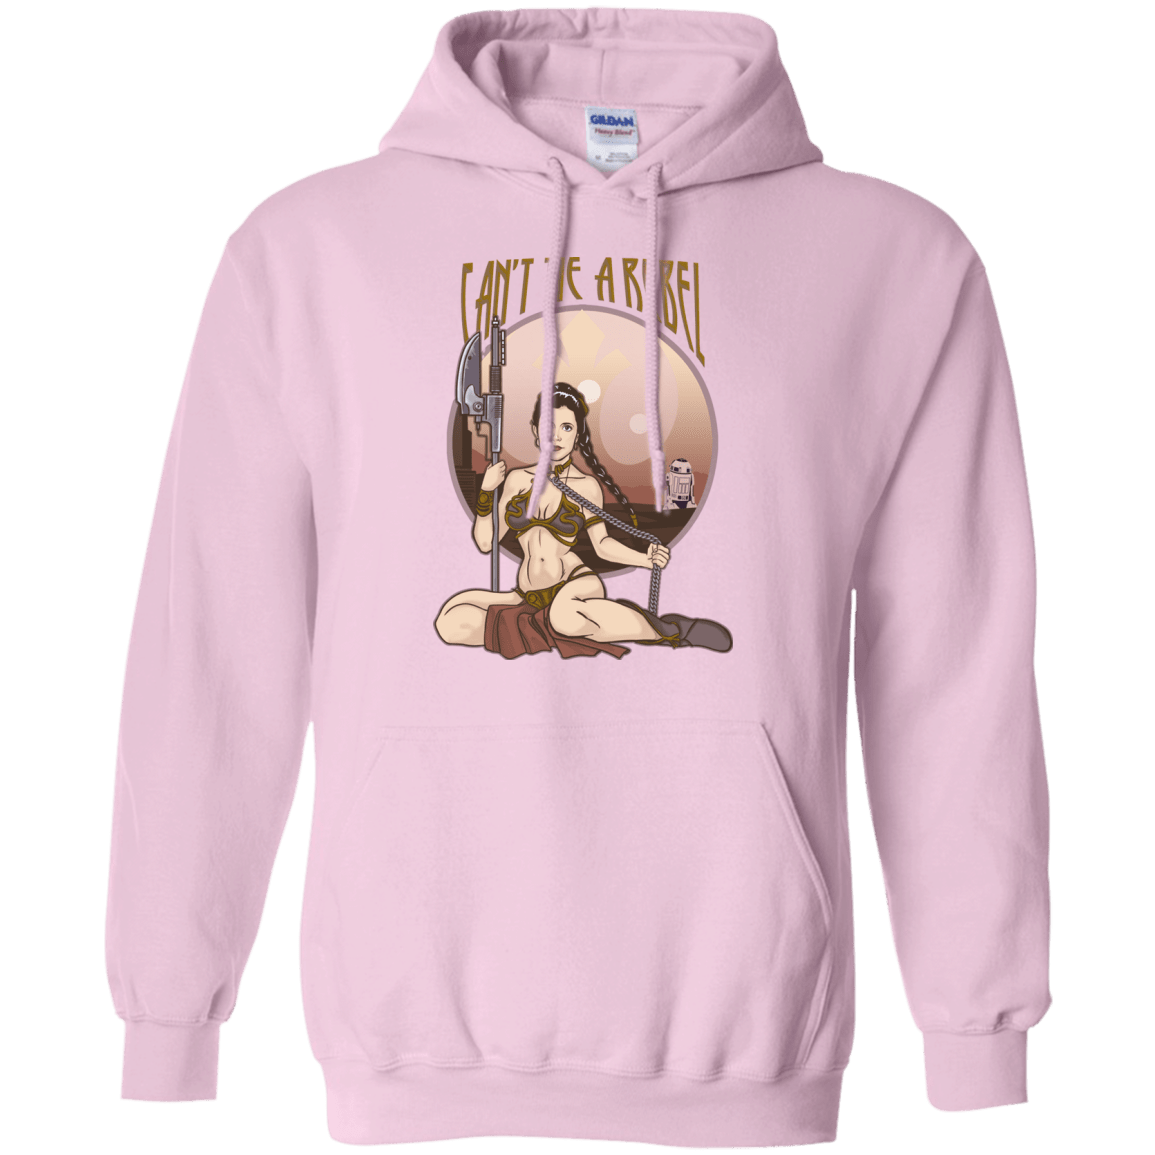 Sweatshirts Light Pink / Small Can't Tie a Rebel Pullover Hoodie